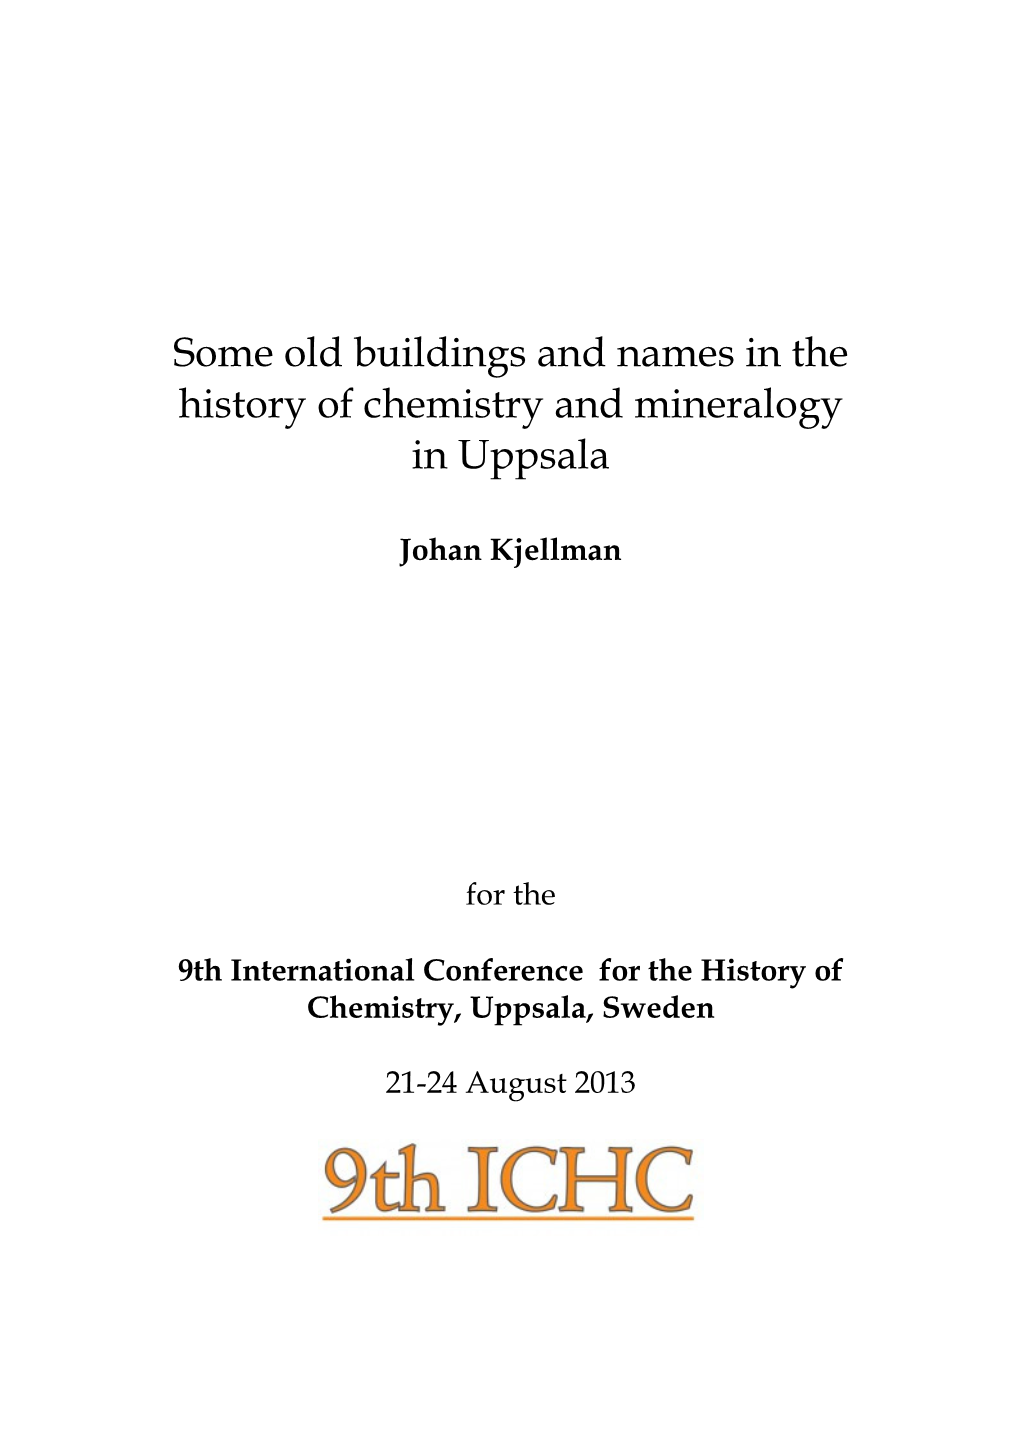 Some Old Buildings and Names in the History of Chemistry and Mineralogy in Uppsala